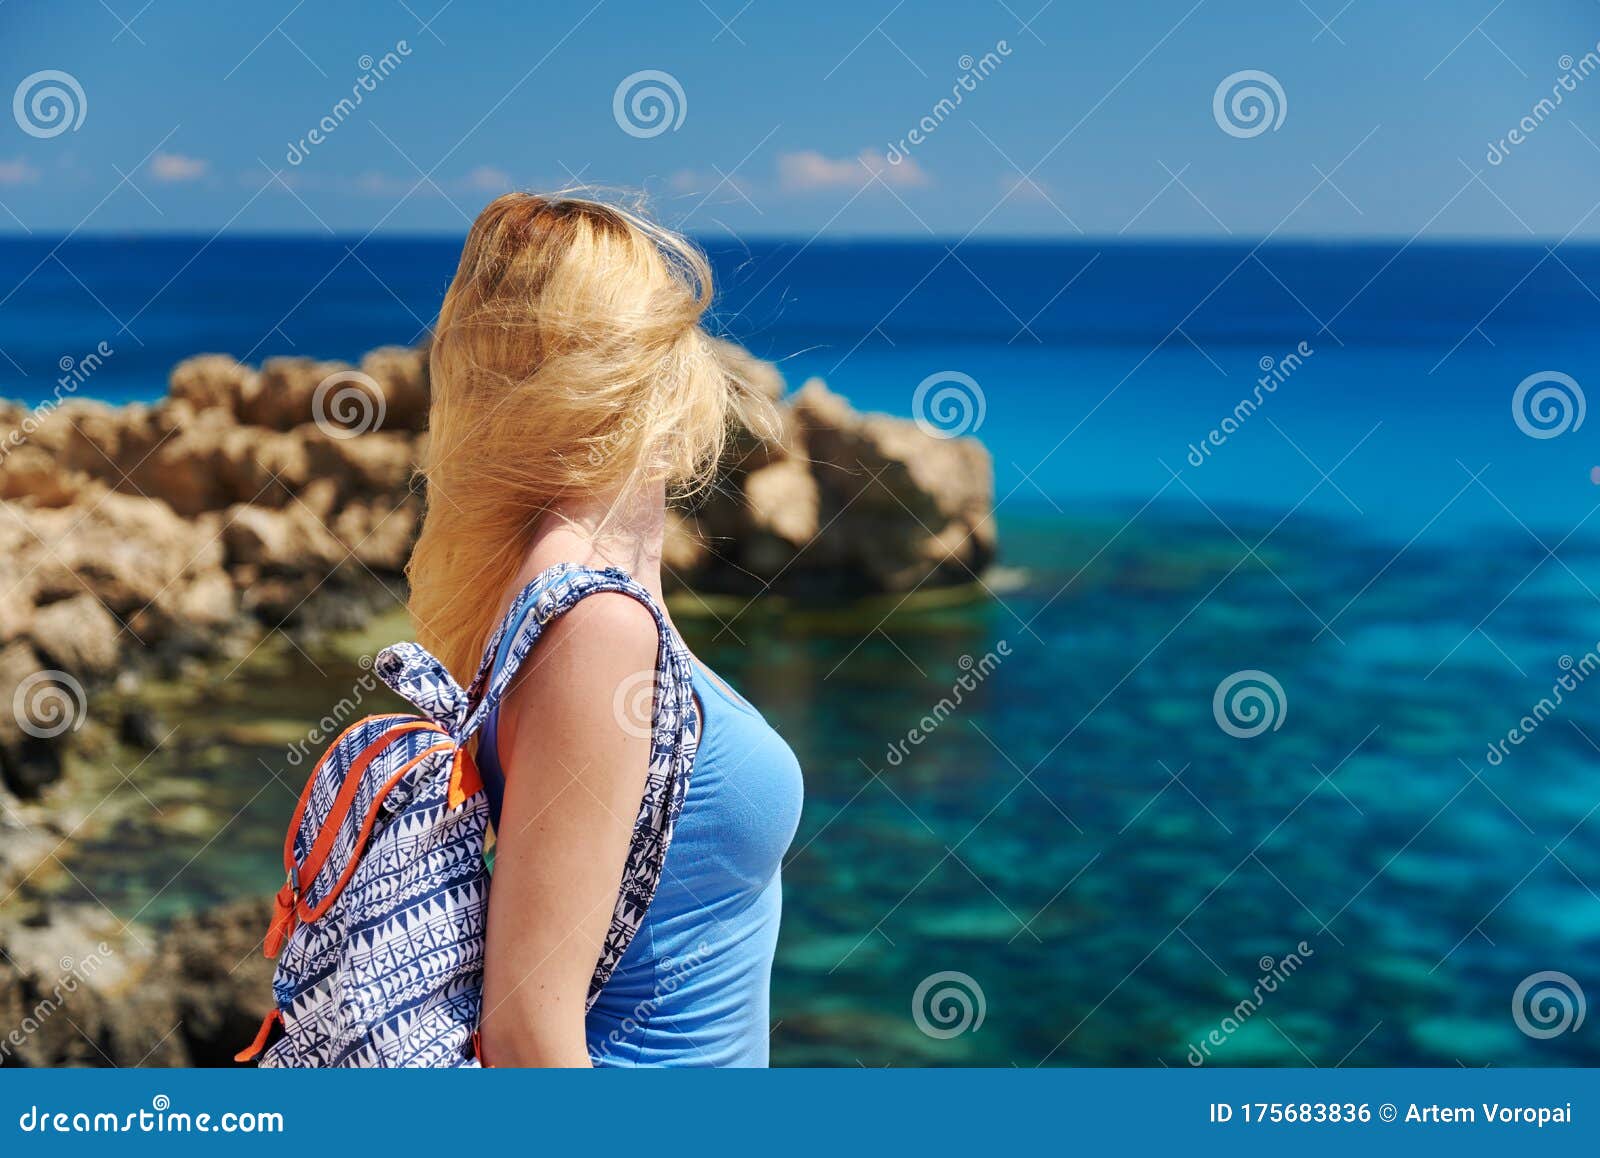 beautiful young woman is looking to the sea being on the picturesque cliffy coast.